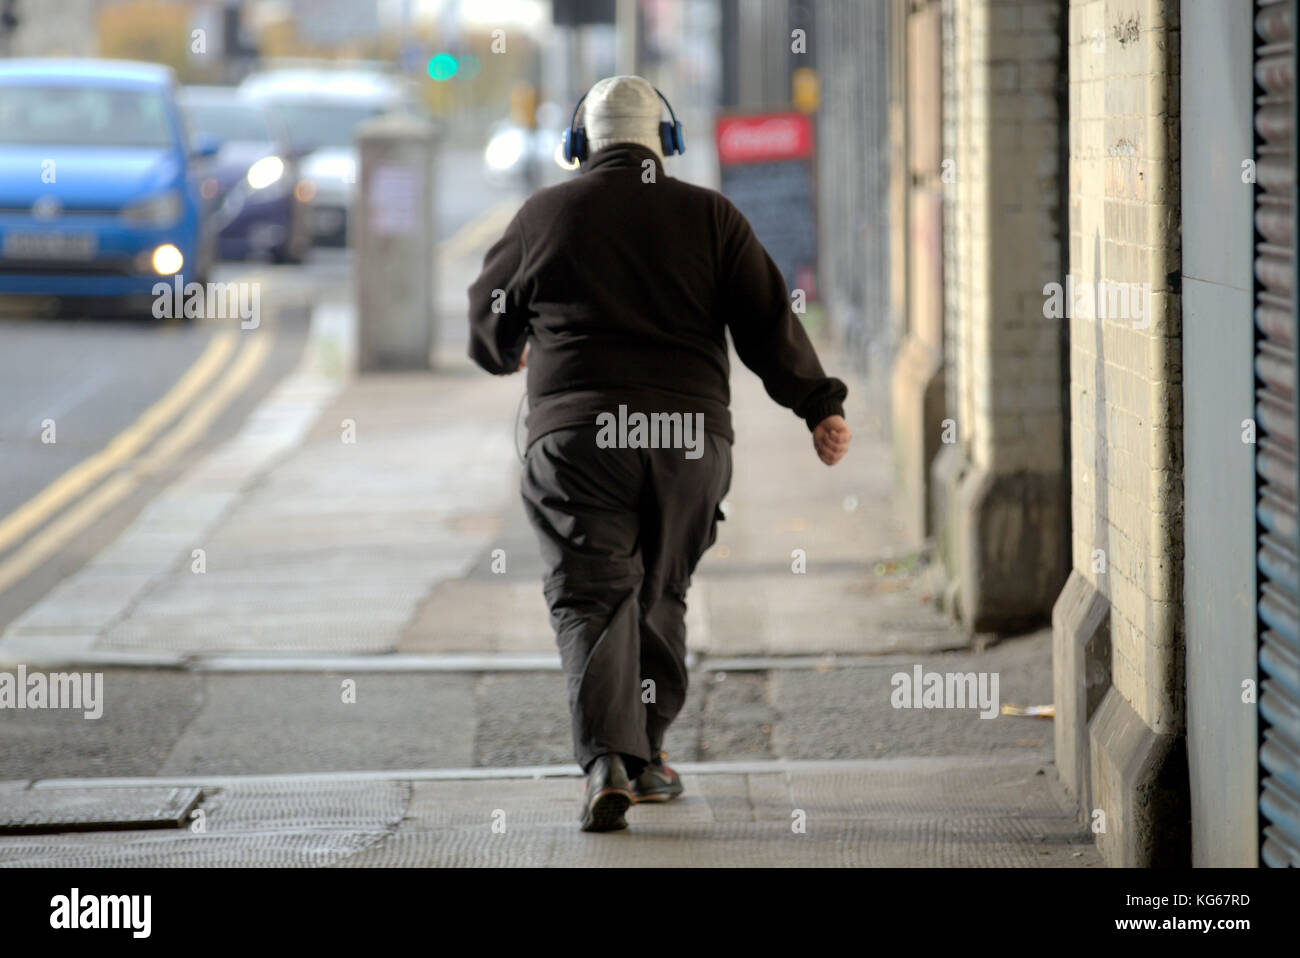 fat man boy with headphones walking on the street viewed from behind Stock Photo